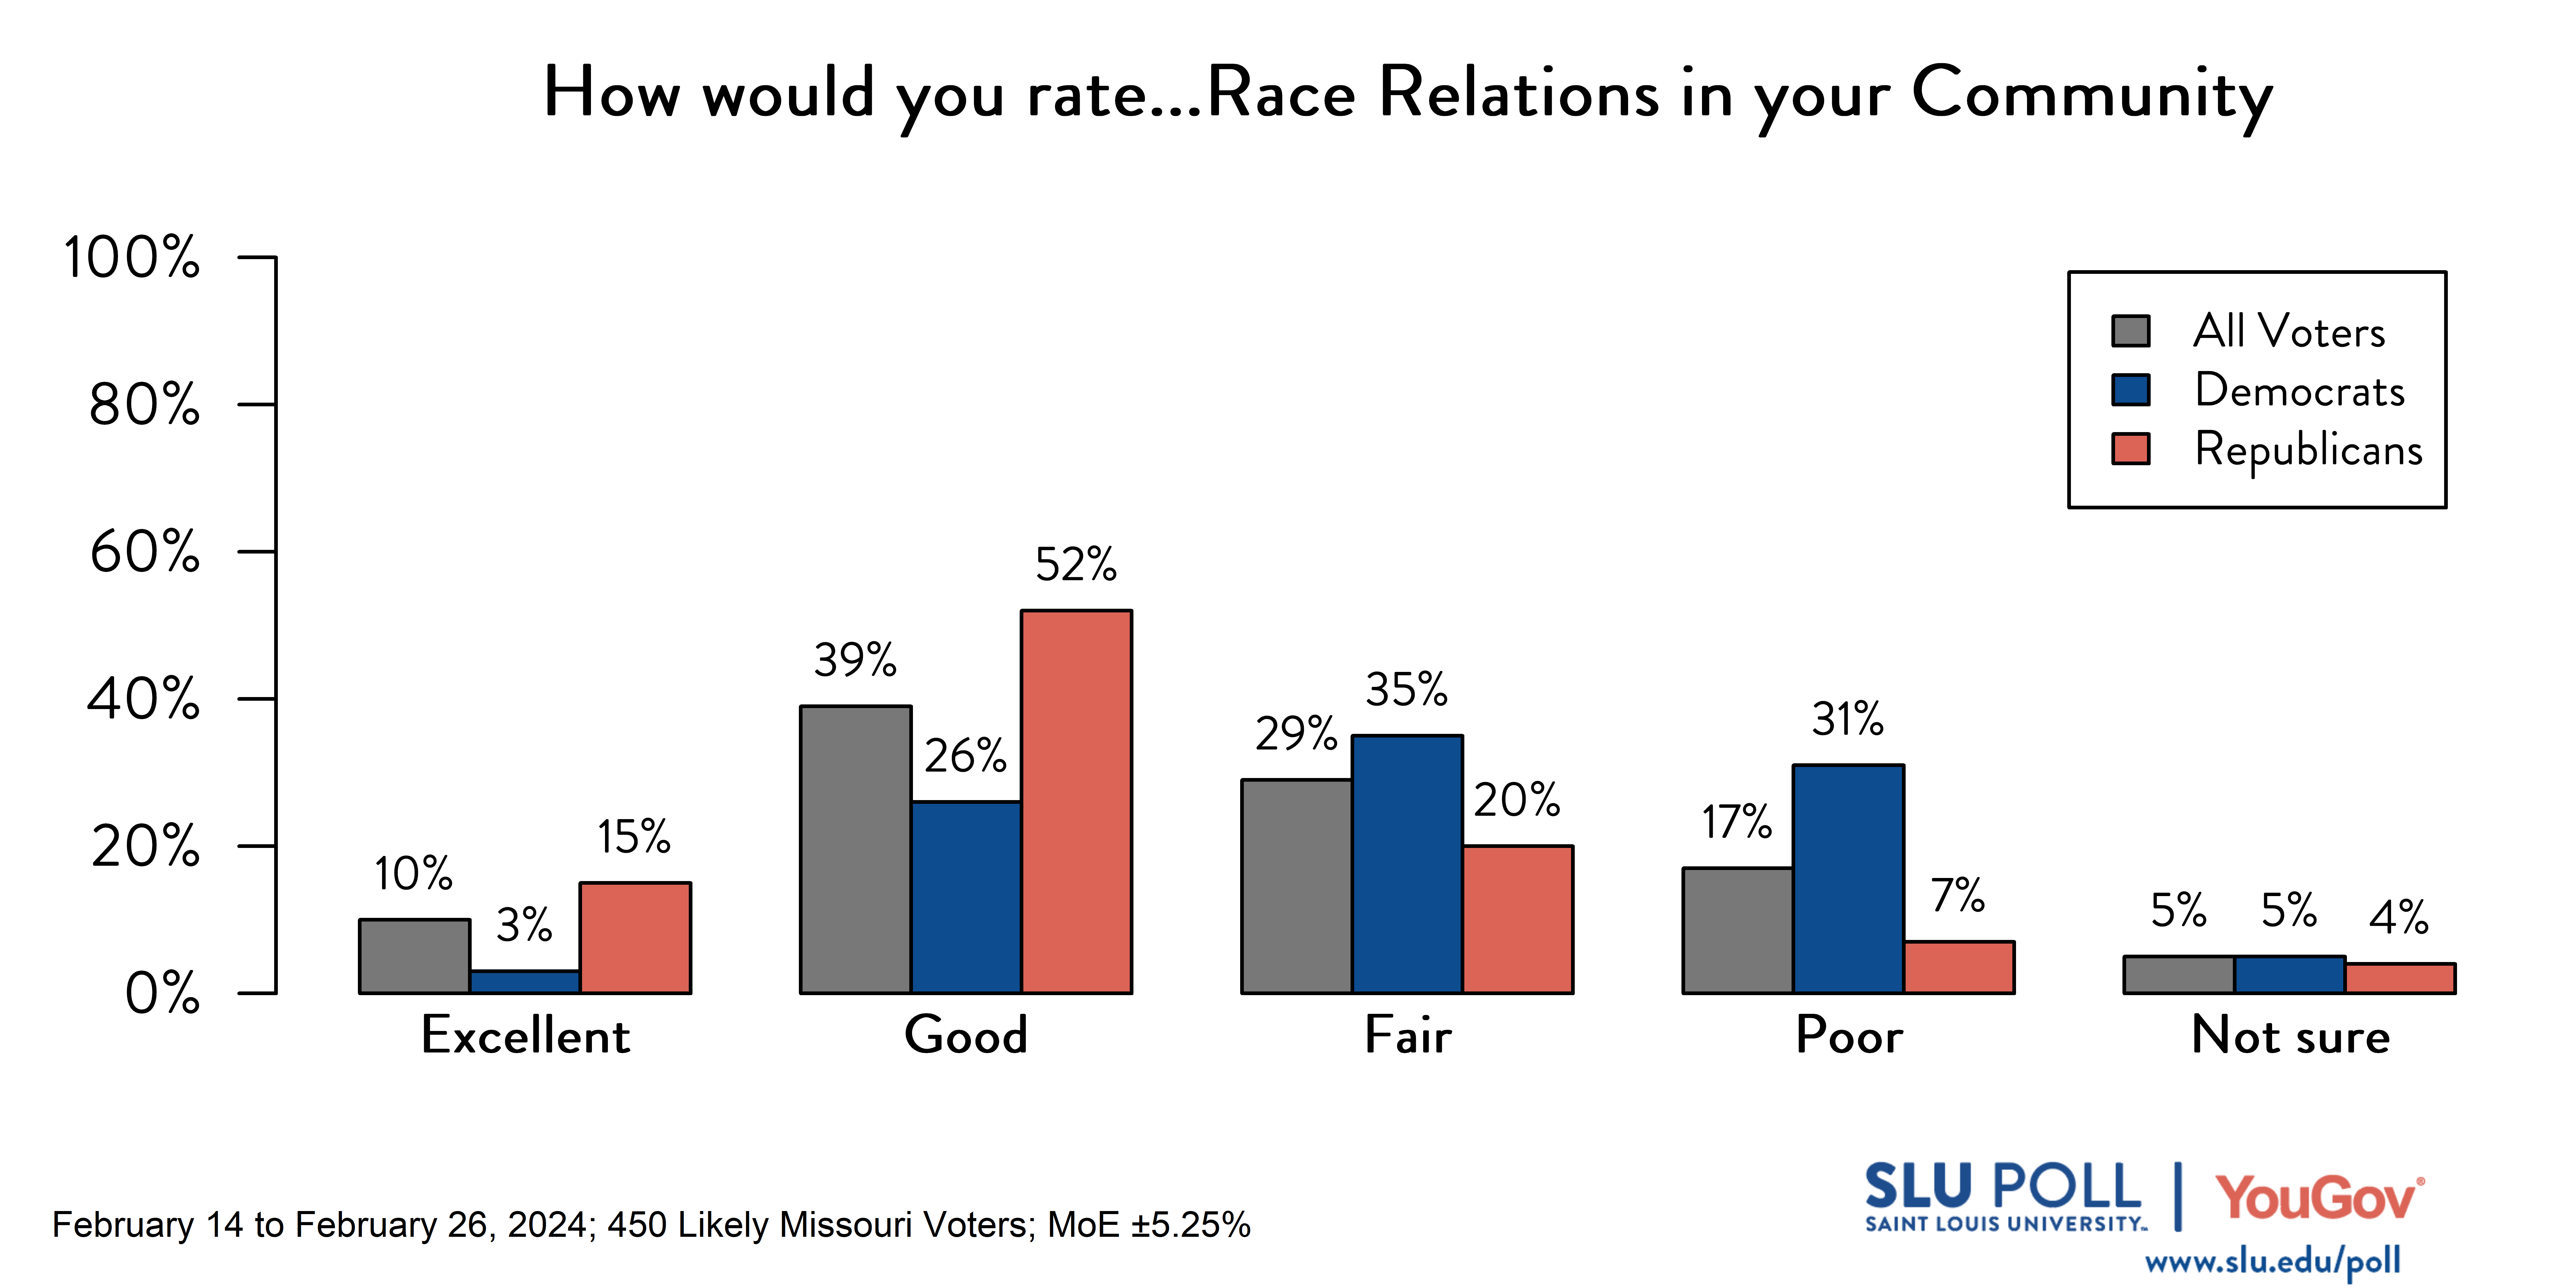 SLU/YouGov Poll results for race relations question